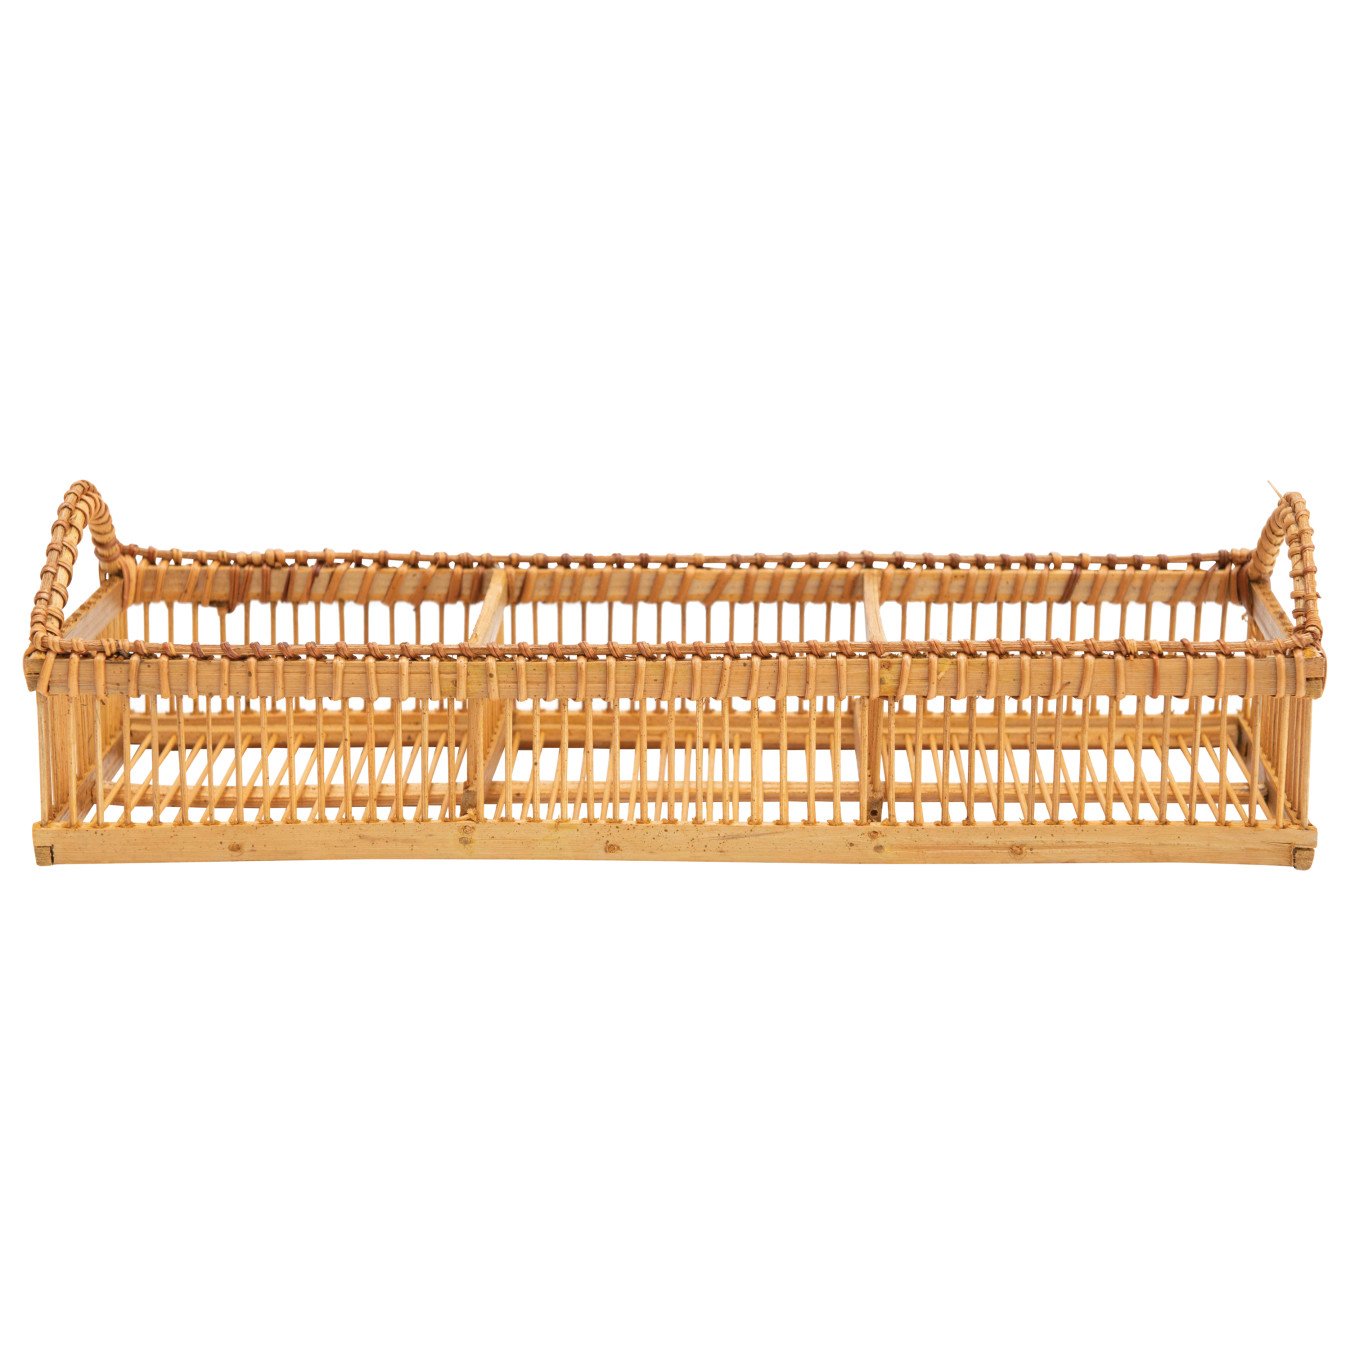 16.25"L Divided Bamboo Tray with 3 Compartments & Handles